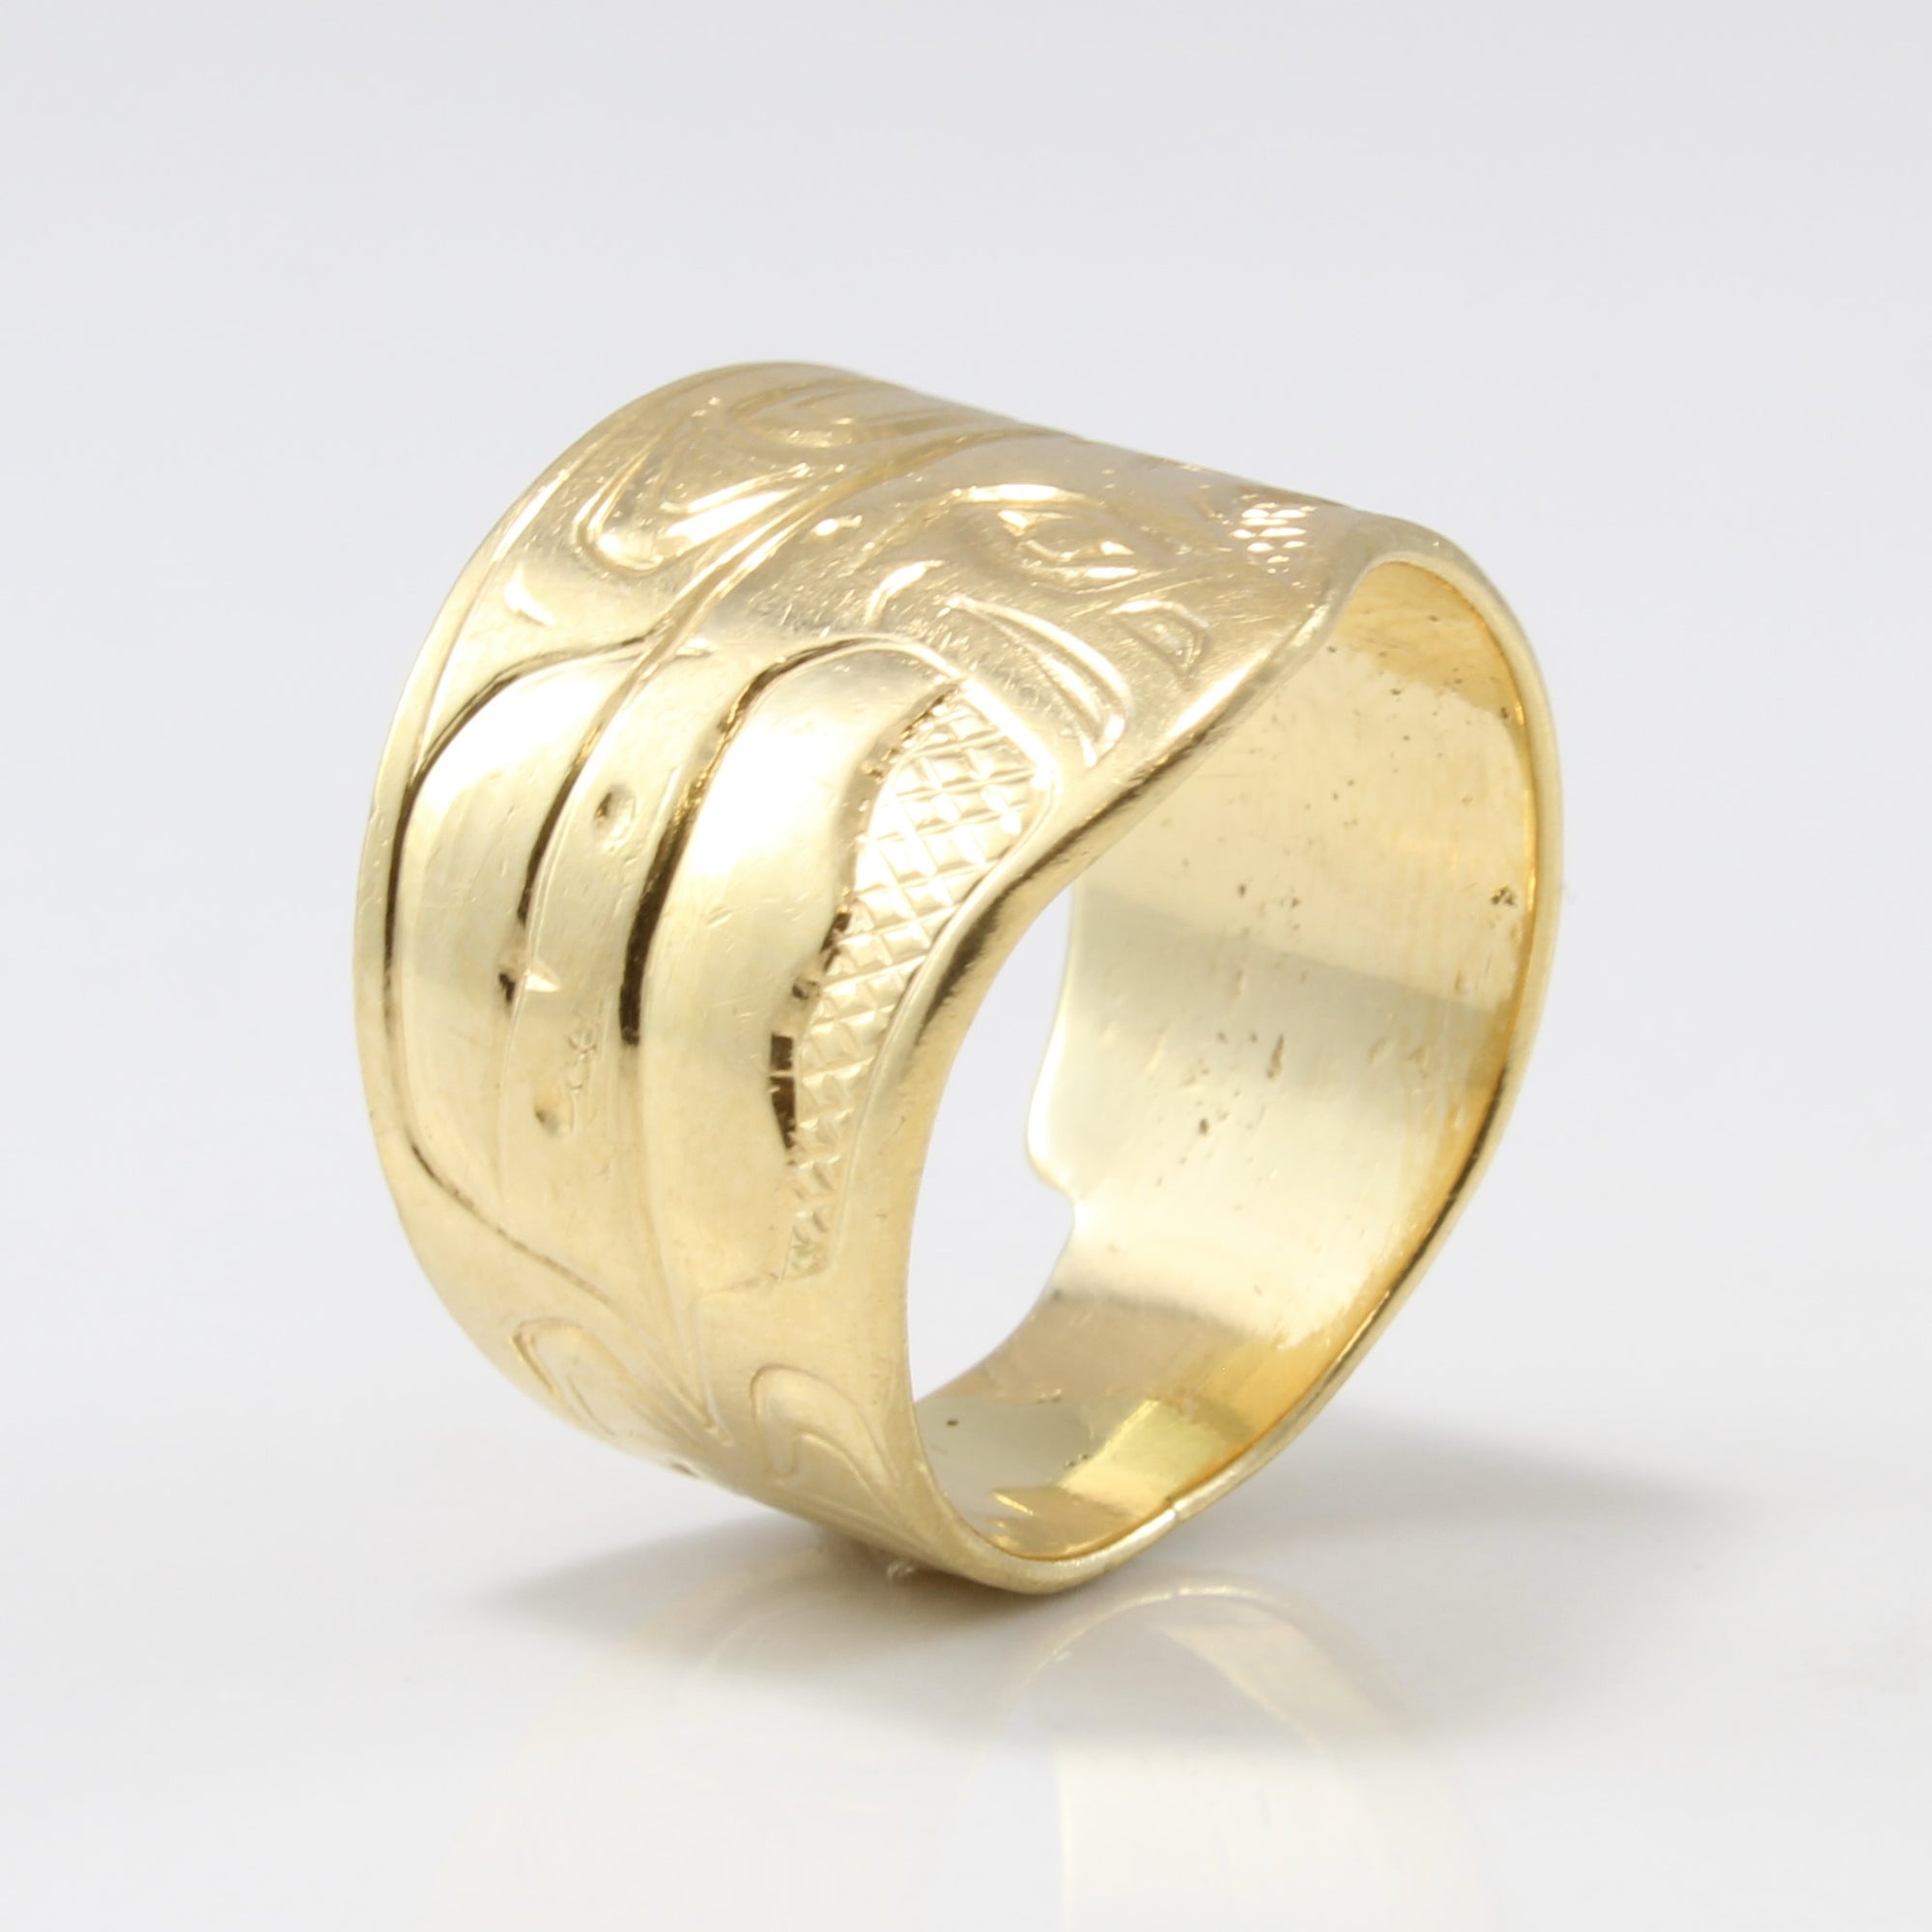 Clarence Mills' Indigenous Orca Art Tapered Ring | SZ 7 |